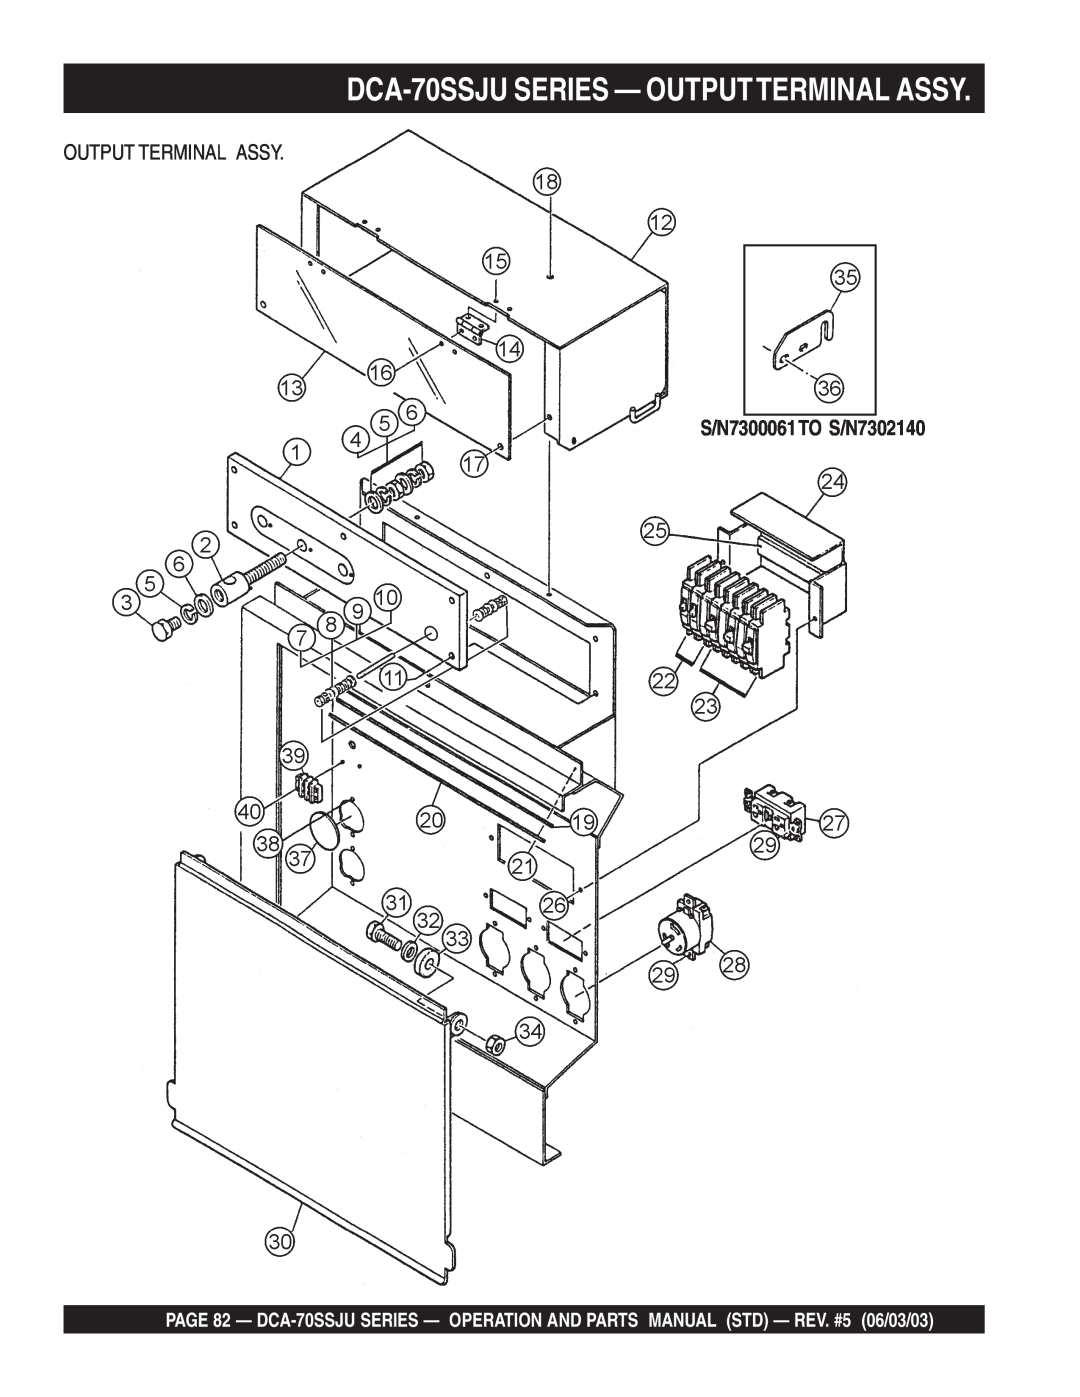 Multiquip operation manual DCA-70SSJUSERIES — OUTPUTTERMINAL ASSY, S/N7300061TO S/N7302140 